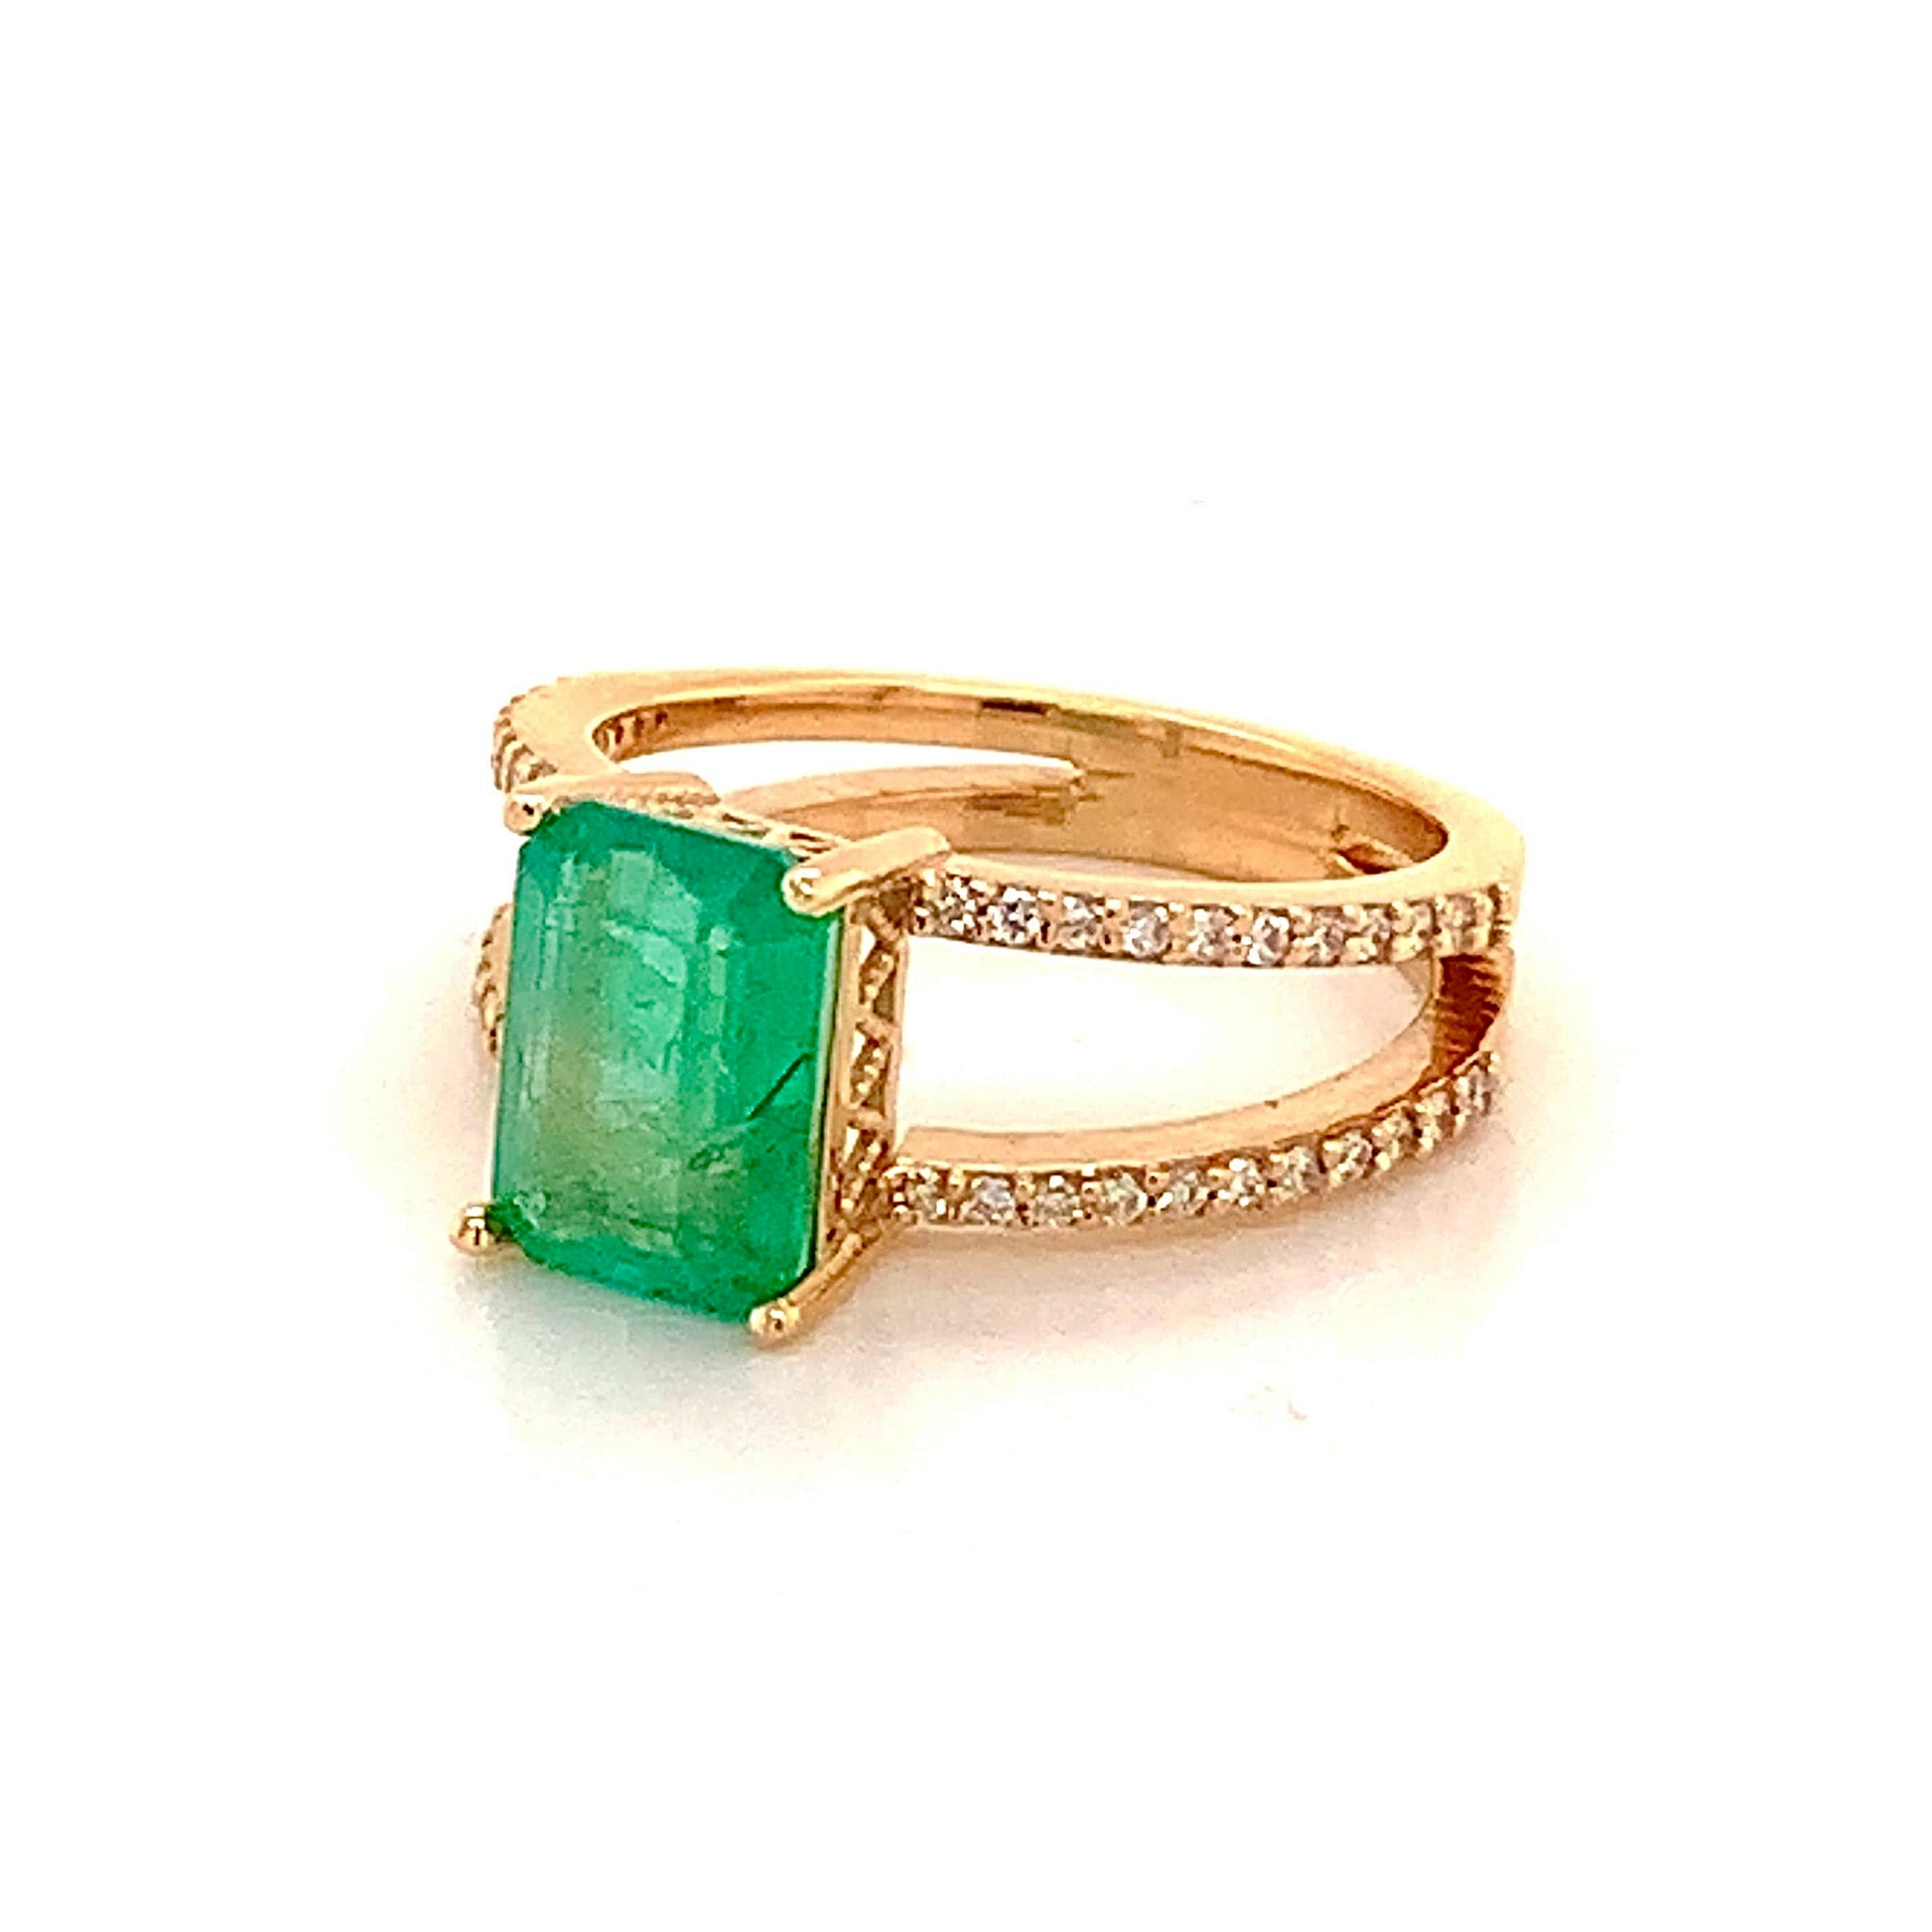 Natural Emerald Diamond Ring 14k Gold 2.32 TCW Size 7 Certified $5,950 111874 - Certified Fine Jewelry